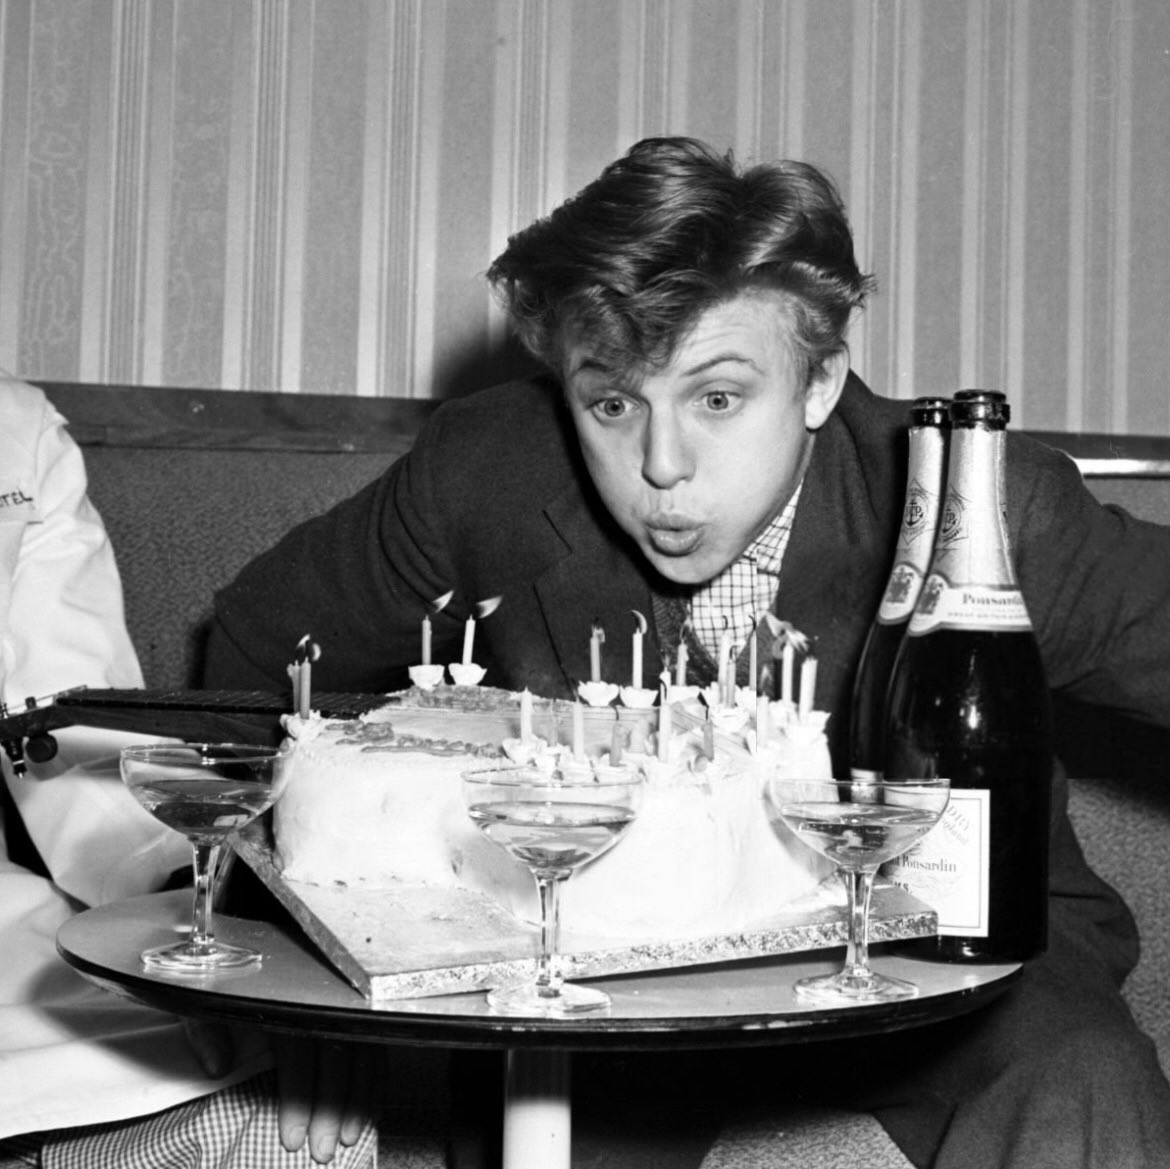 Wishing the amazing Tommy Steele a very happy 87th birthday today. Happy Birthday Sir! 
Here pictured on his birthday in 1958!
#tommysteele